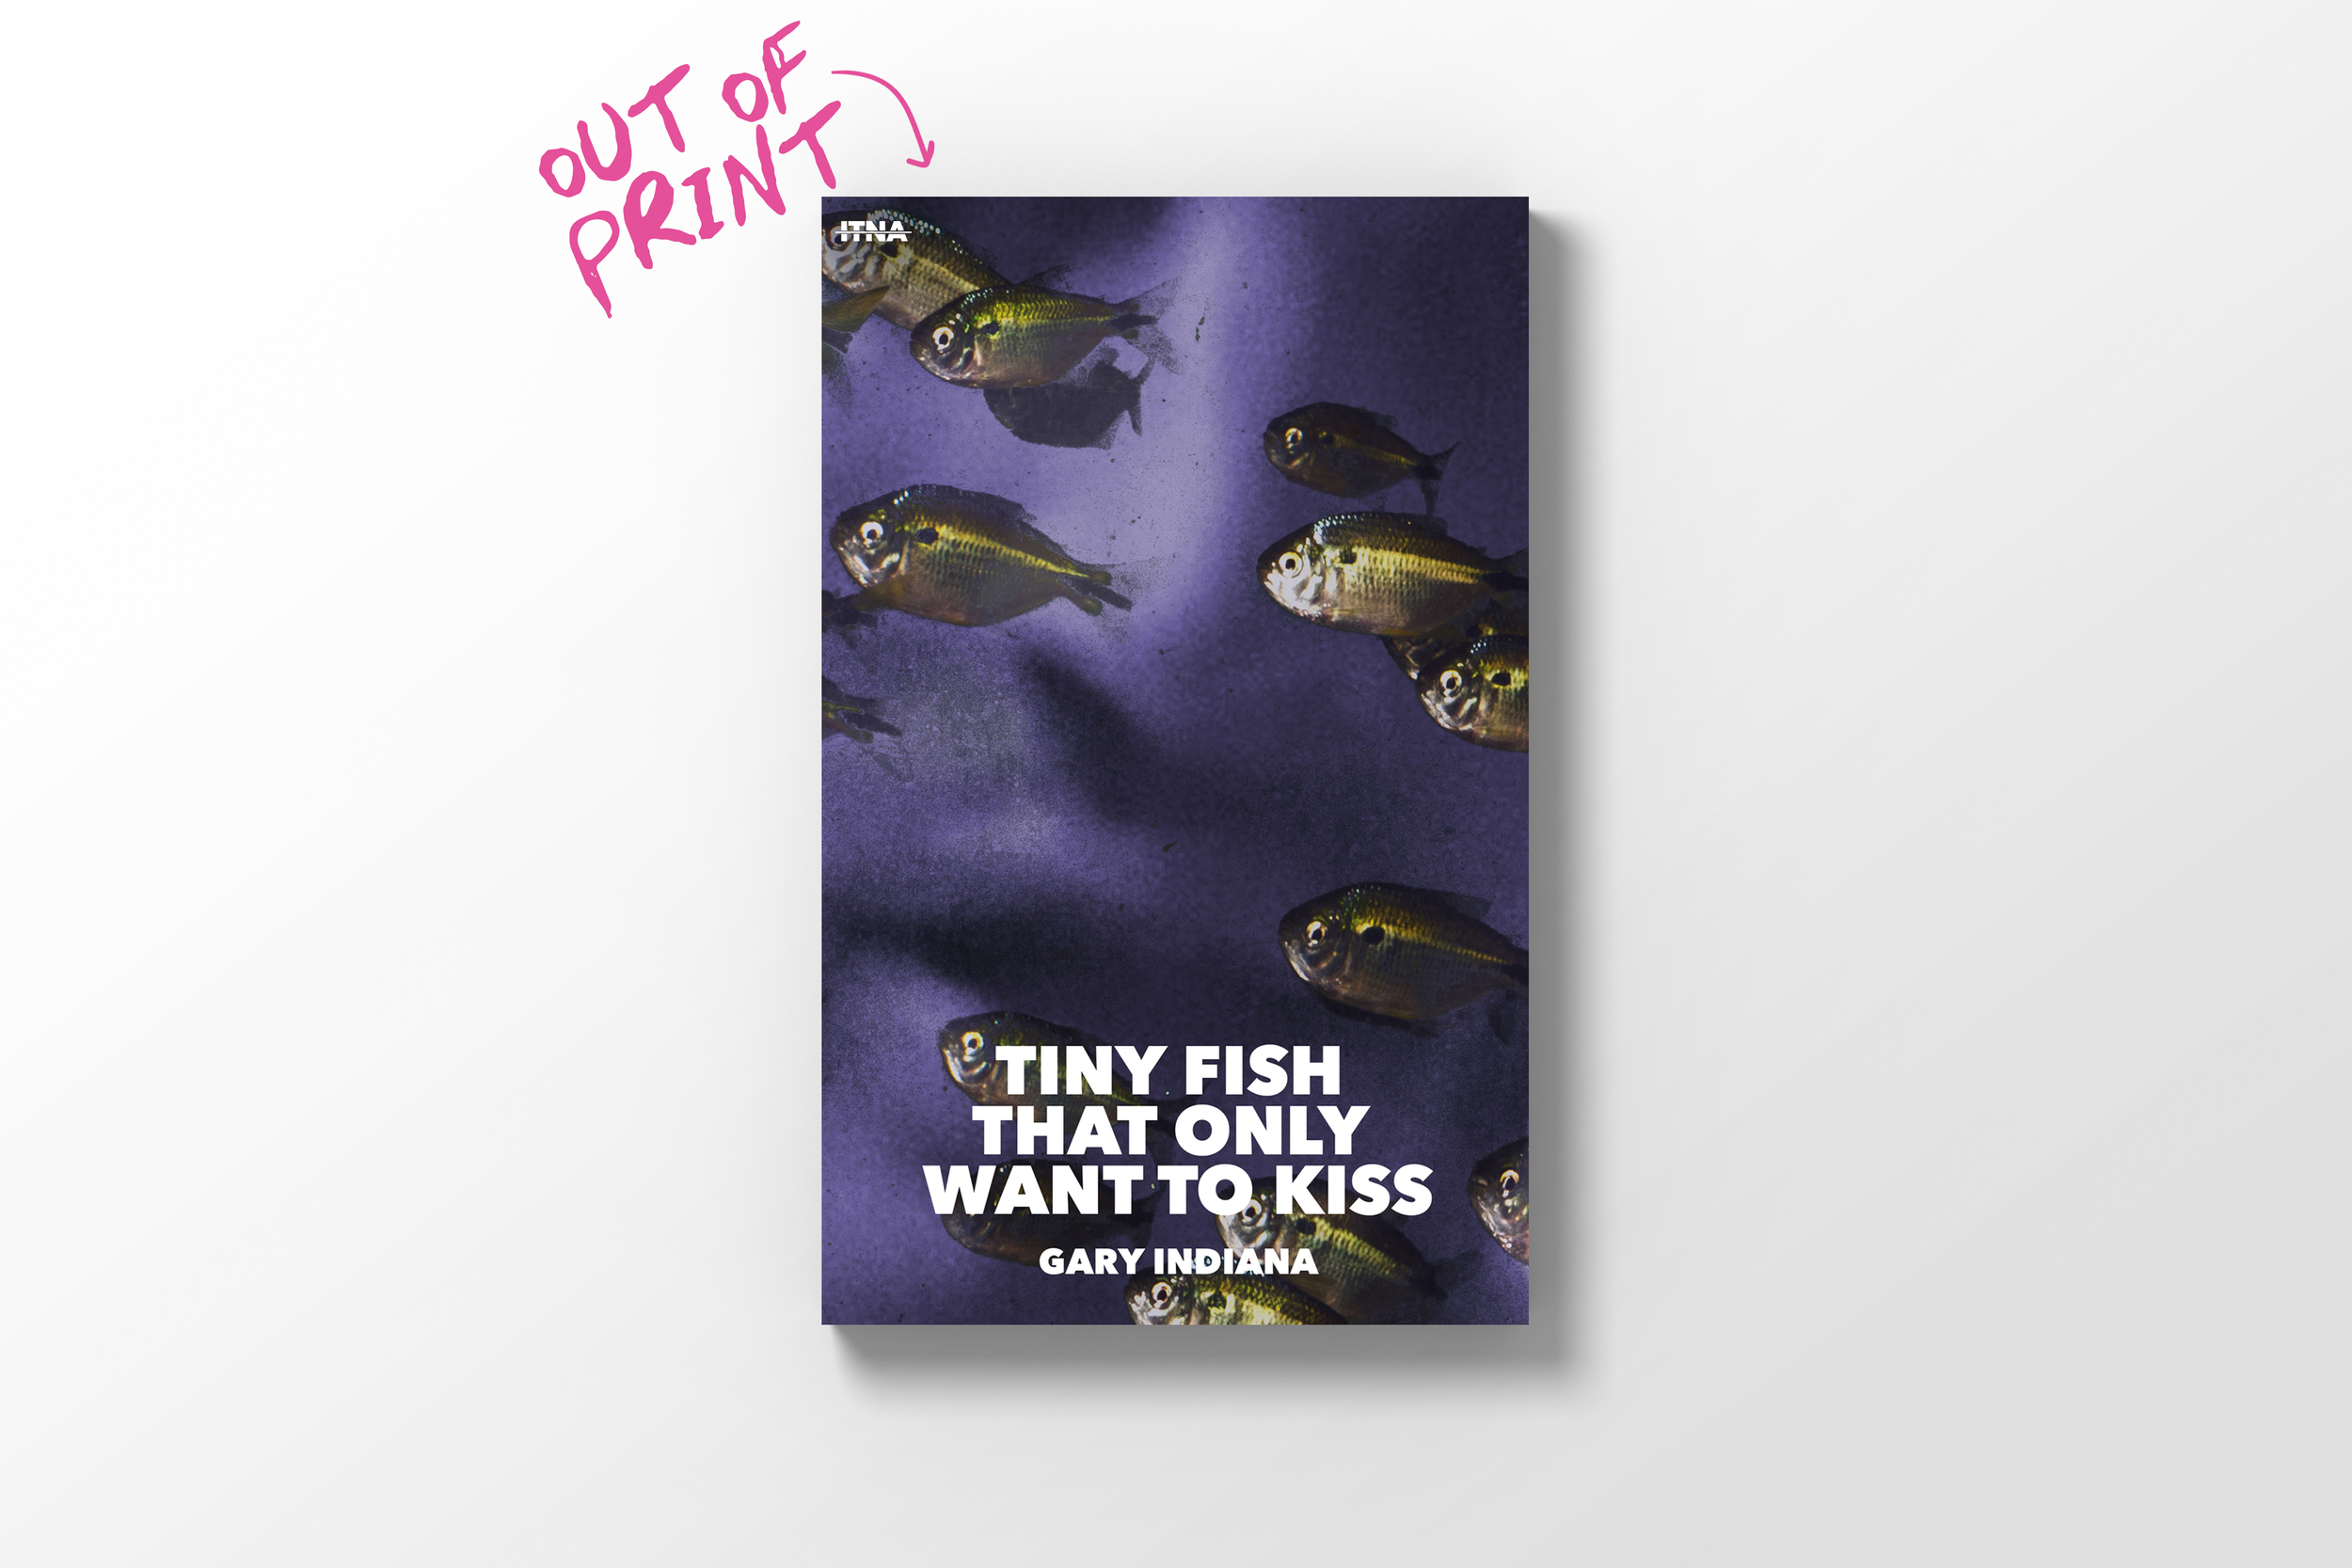 TINY FISH THAT ONLY WANT TO KISS | Gary Indiana